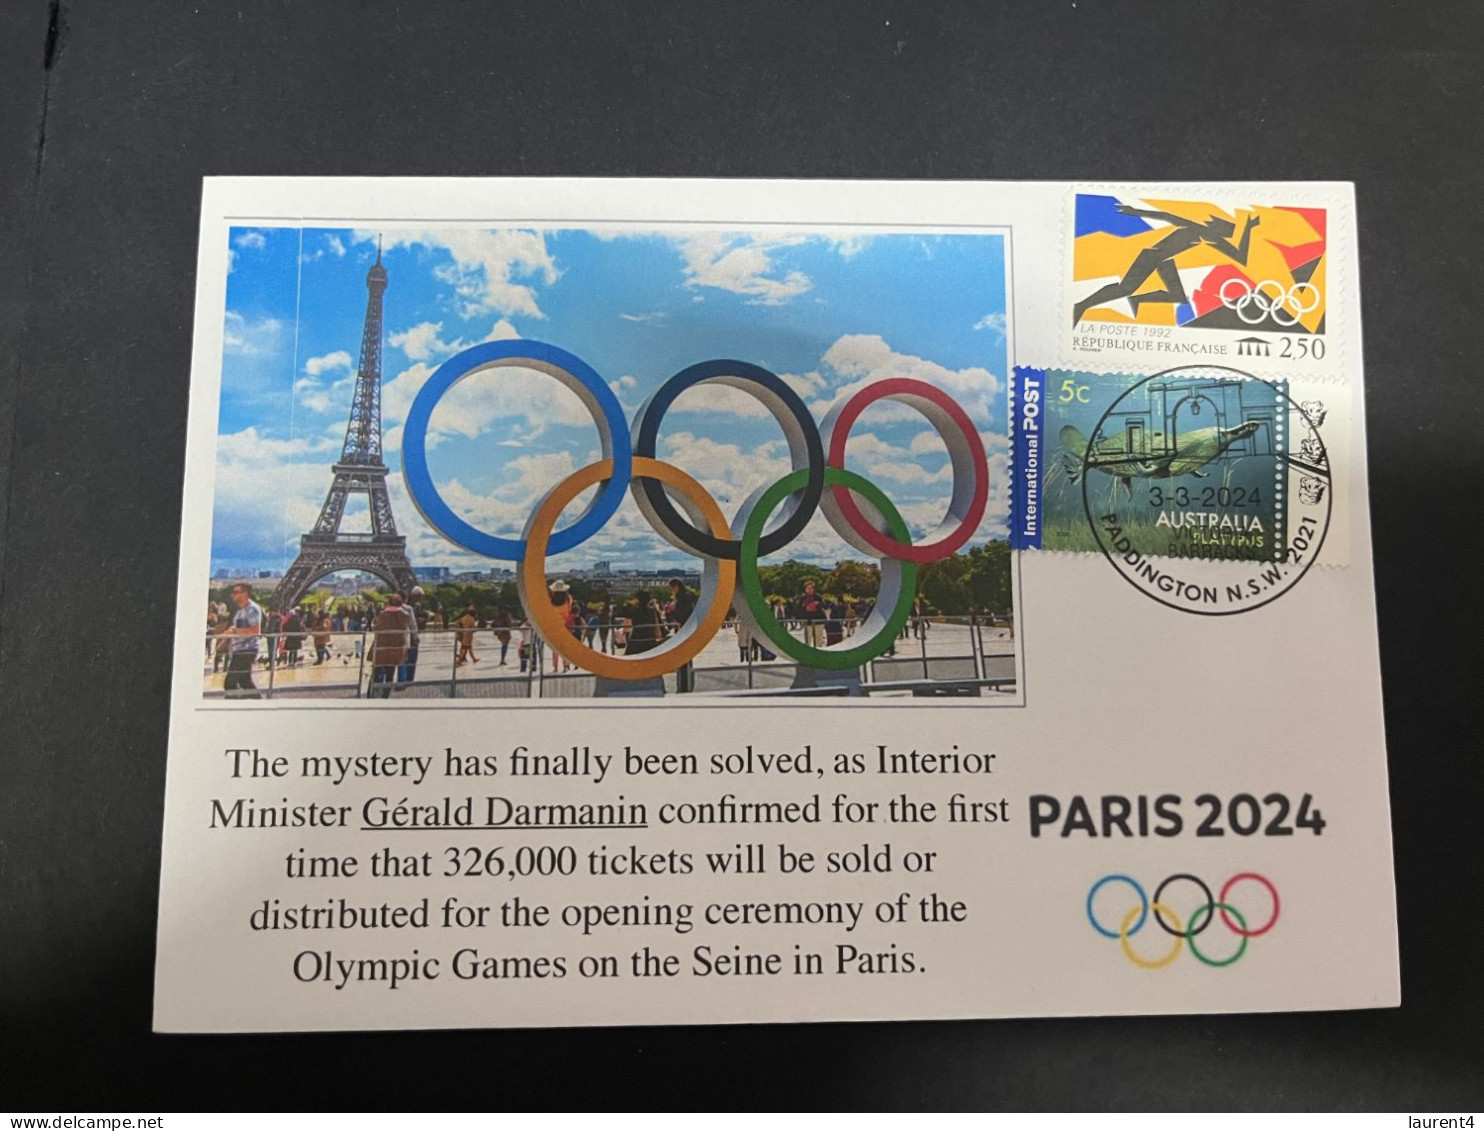 7-3-2024 (2 Y 22) Paris 2024 Summer Olympic - 326,000 Tickets Available To The Games Opening Ceremony On Seine River - Summer 2024: Paris